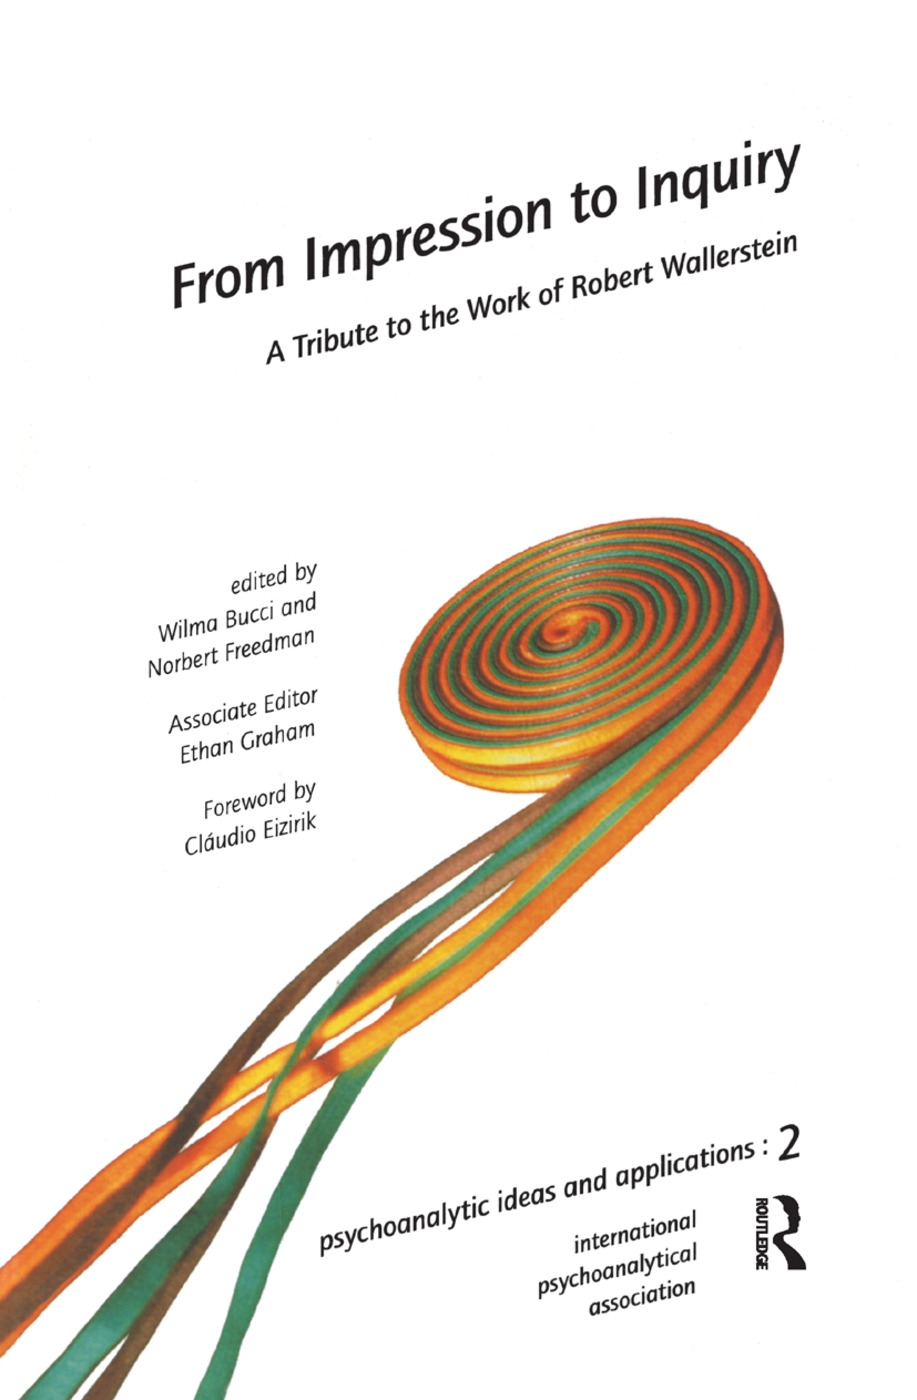 From Impression to Inquiry: A Tribute to the Work of Robert Wallerstein